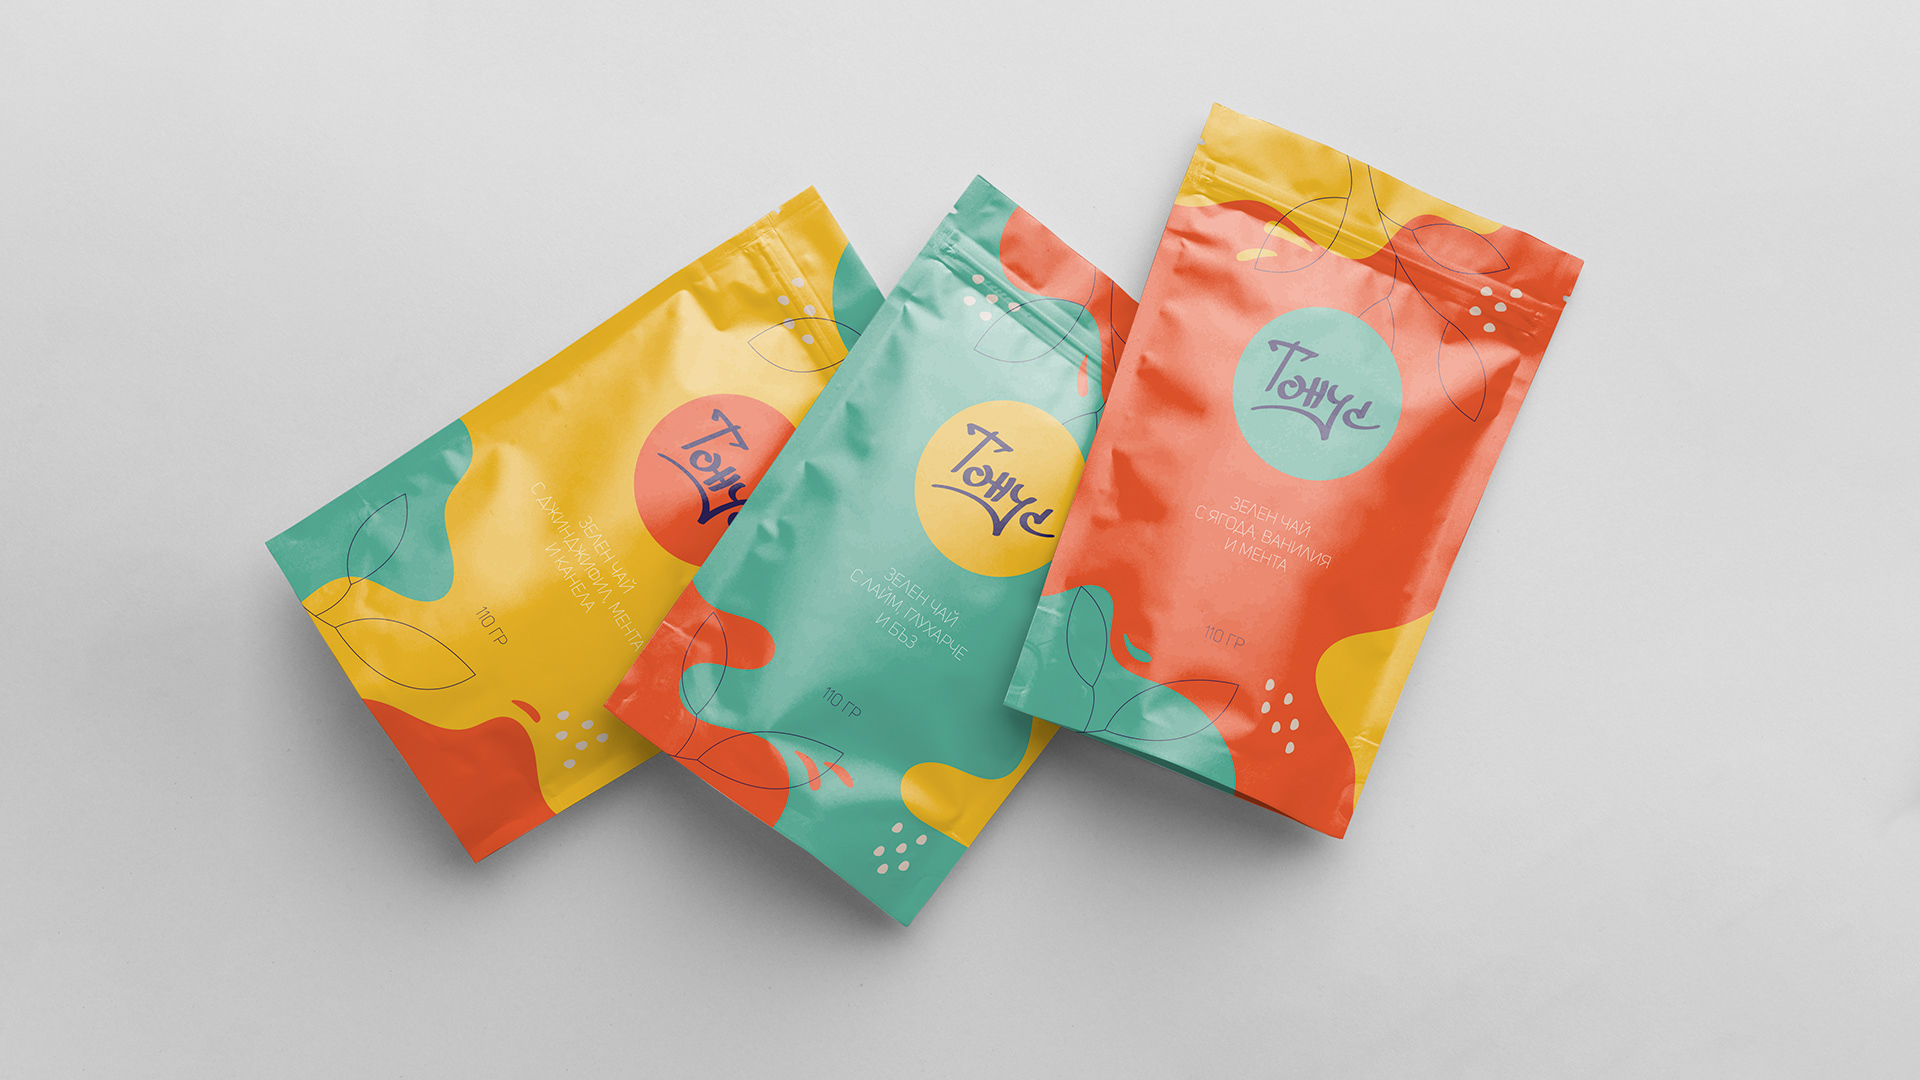 Colorful snack packaging with abstract design elements